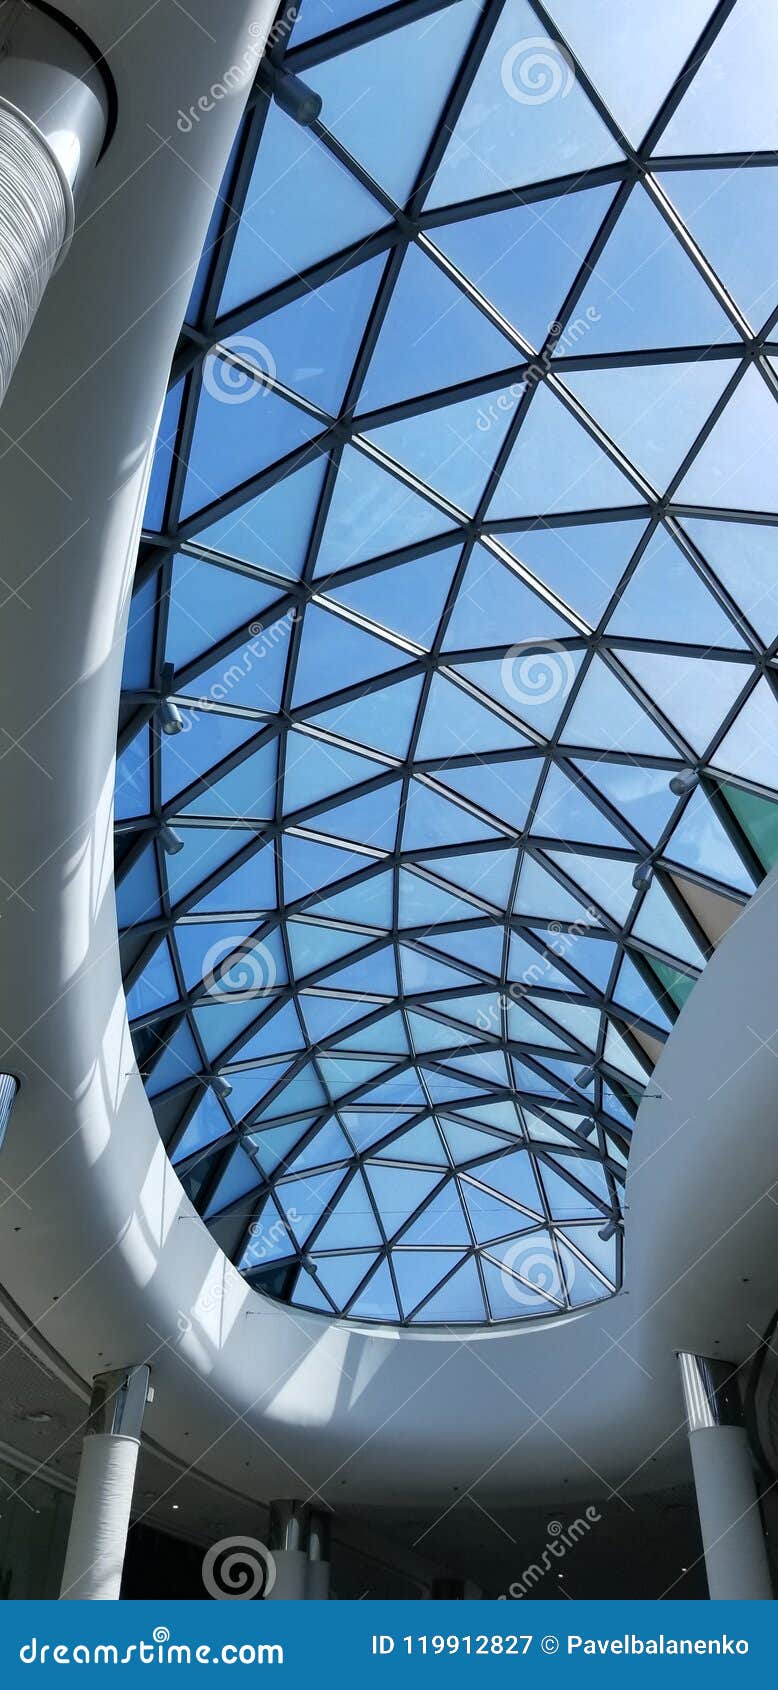 Top Glass Roof Of A Shopping Mall Stock Image Image Of